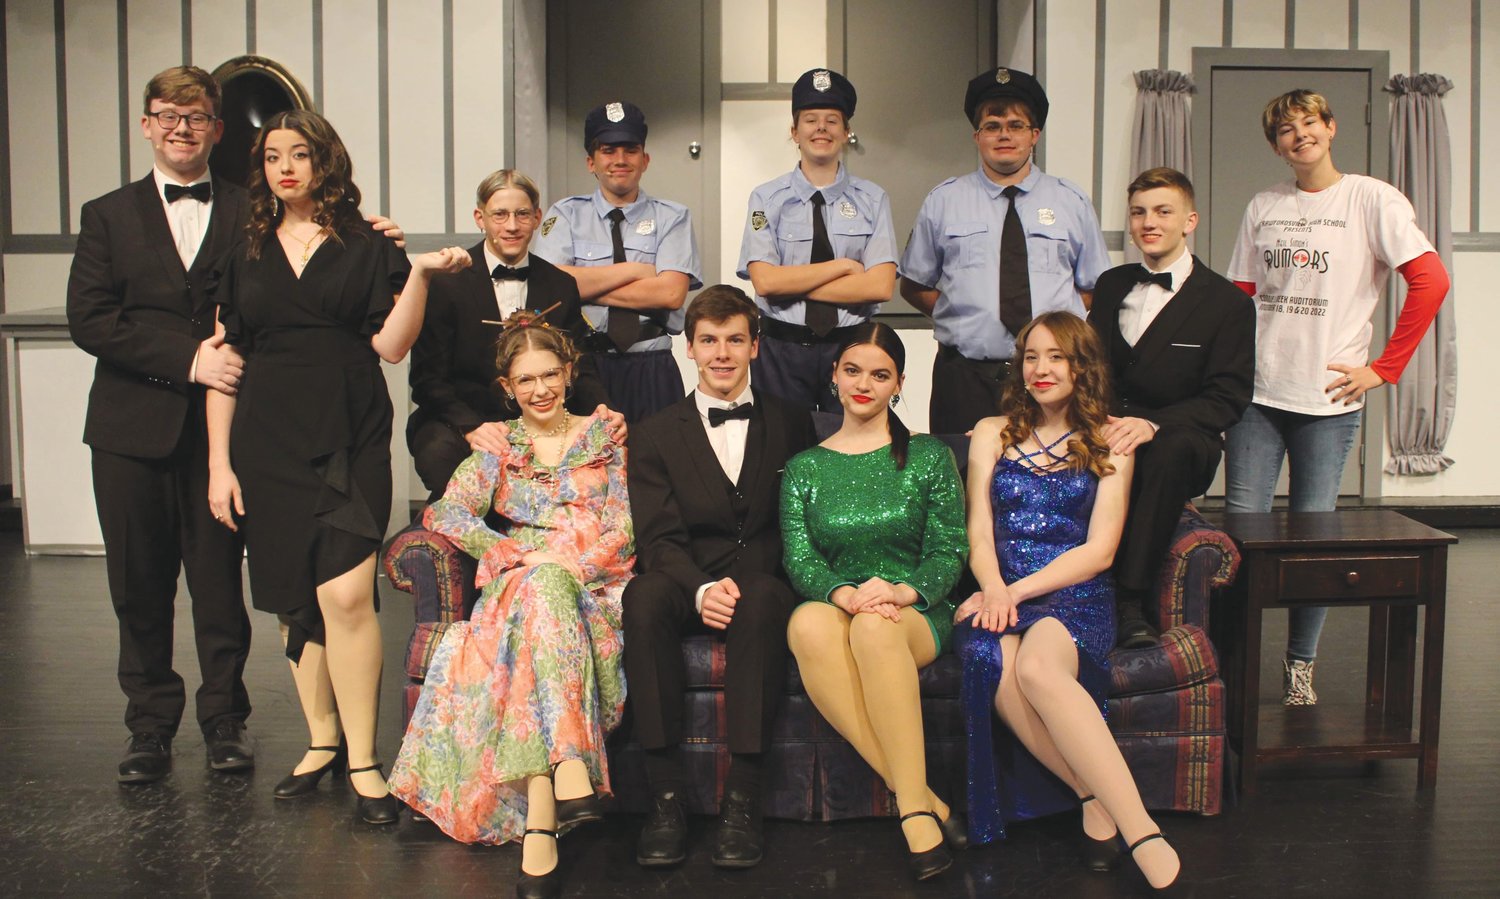 Crawfordsville High School students will perform Neil Simon’s Rumors at 7 p.m. today and Saturday and 2:30 p.m. Sunday in the high school auditorium. Tickets are online presale only.